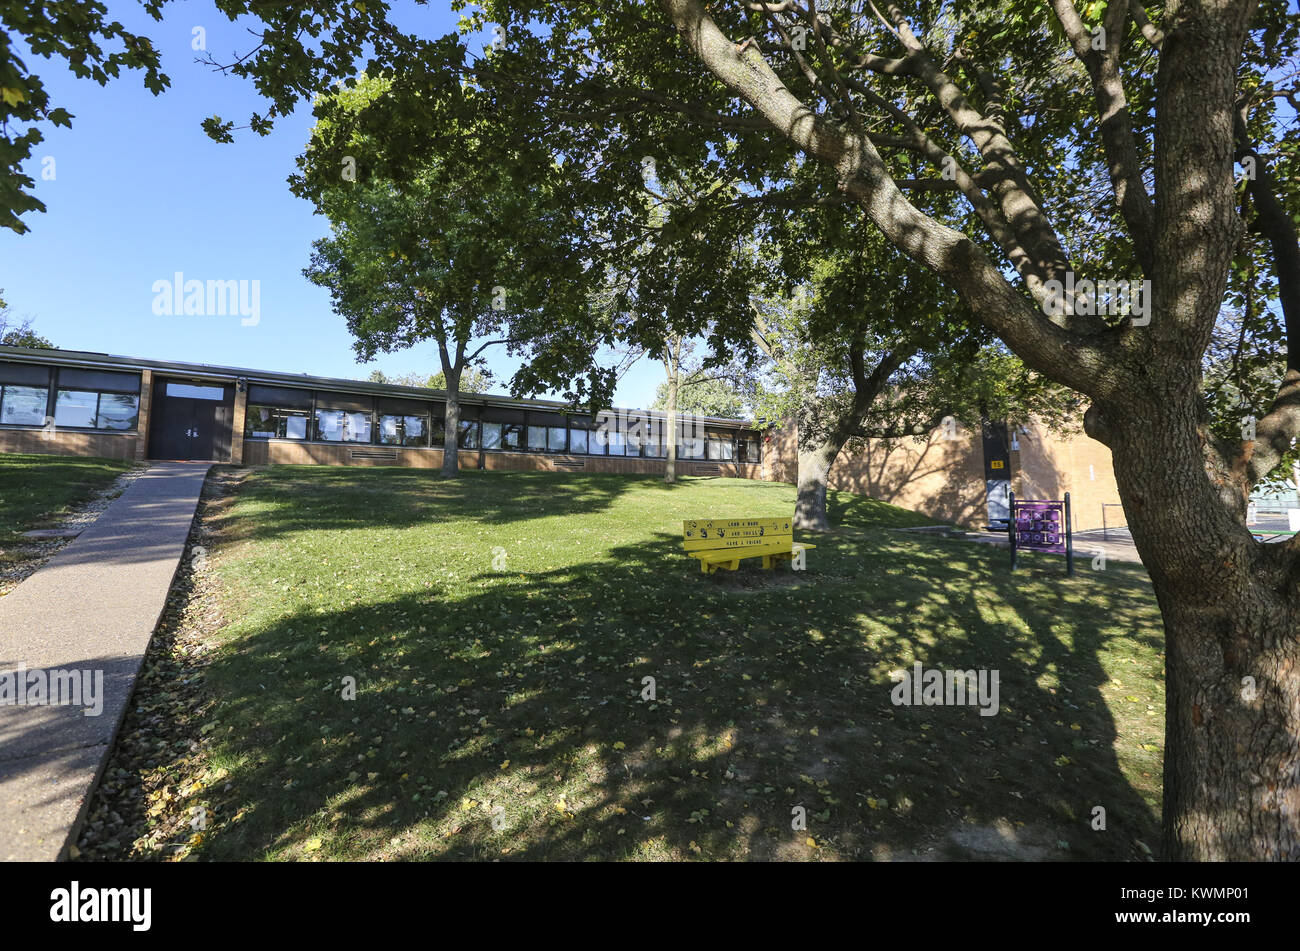 Davenport, Iowa, USA. 5th Oct, 2016. A currently underutilized grass lawn is seen at Grant Wood Elementary School in Bettendorf Wednesday, October 5, 2016. The area between the sidewalk on the left and the brick wall of the gymnasium will be an expansion of new classrooms, with the sidewalk marking the location of the hallway for the expansion. The school consistently must turn away students in its region as it already has its capacity of 375 students. The school hopes to break ground on April 1st for what is proposed to be an 18-month renovation and addition project that will ultimately Stock Photo